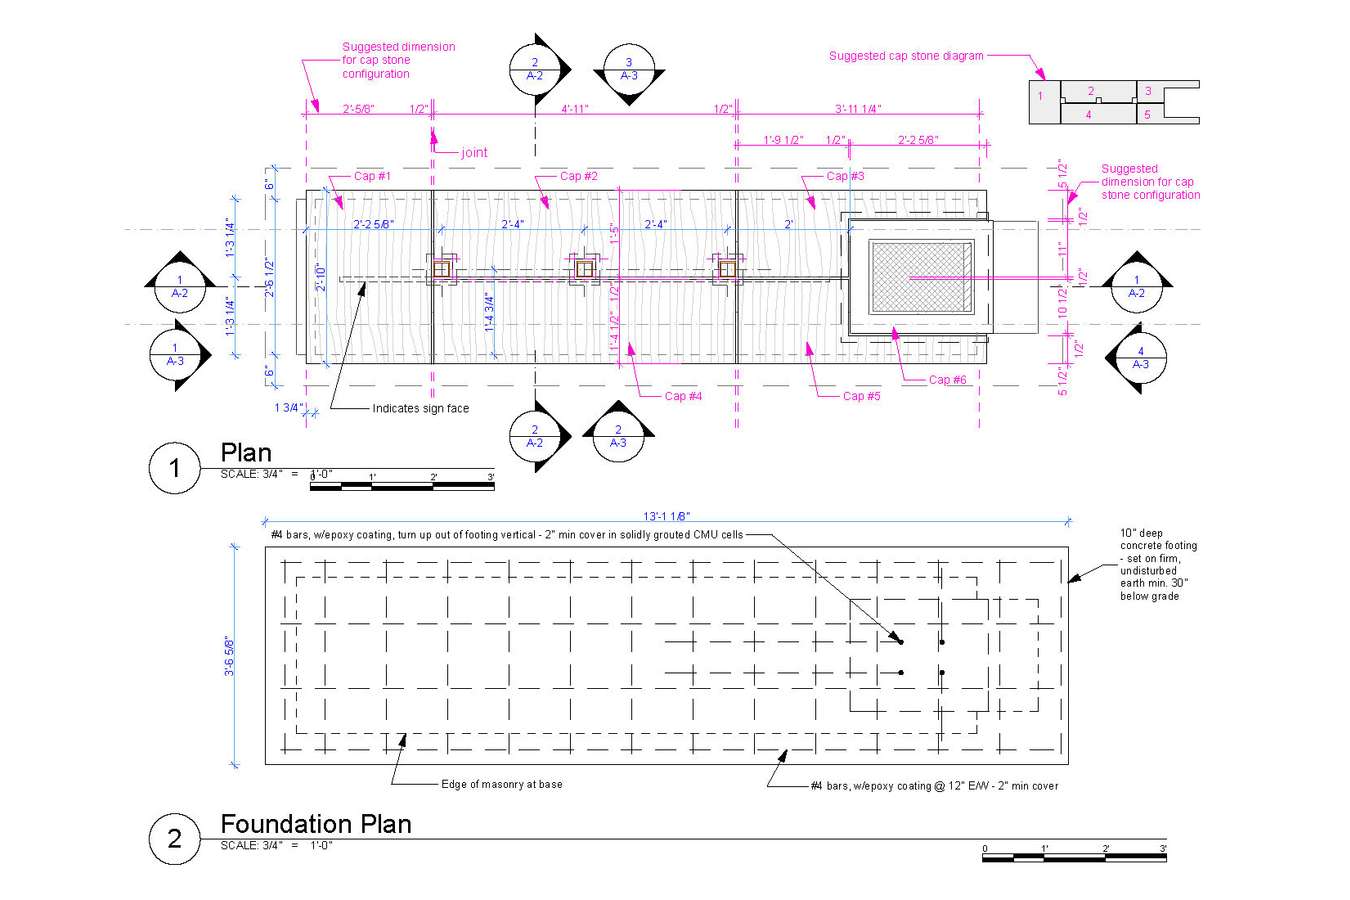 4A Flrpln pg8 : Plans and Elevations